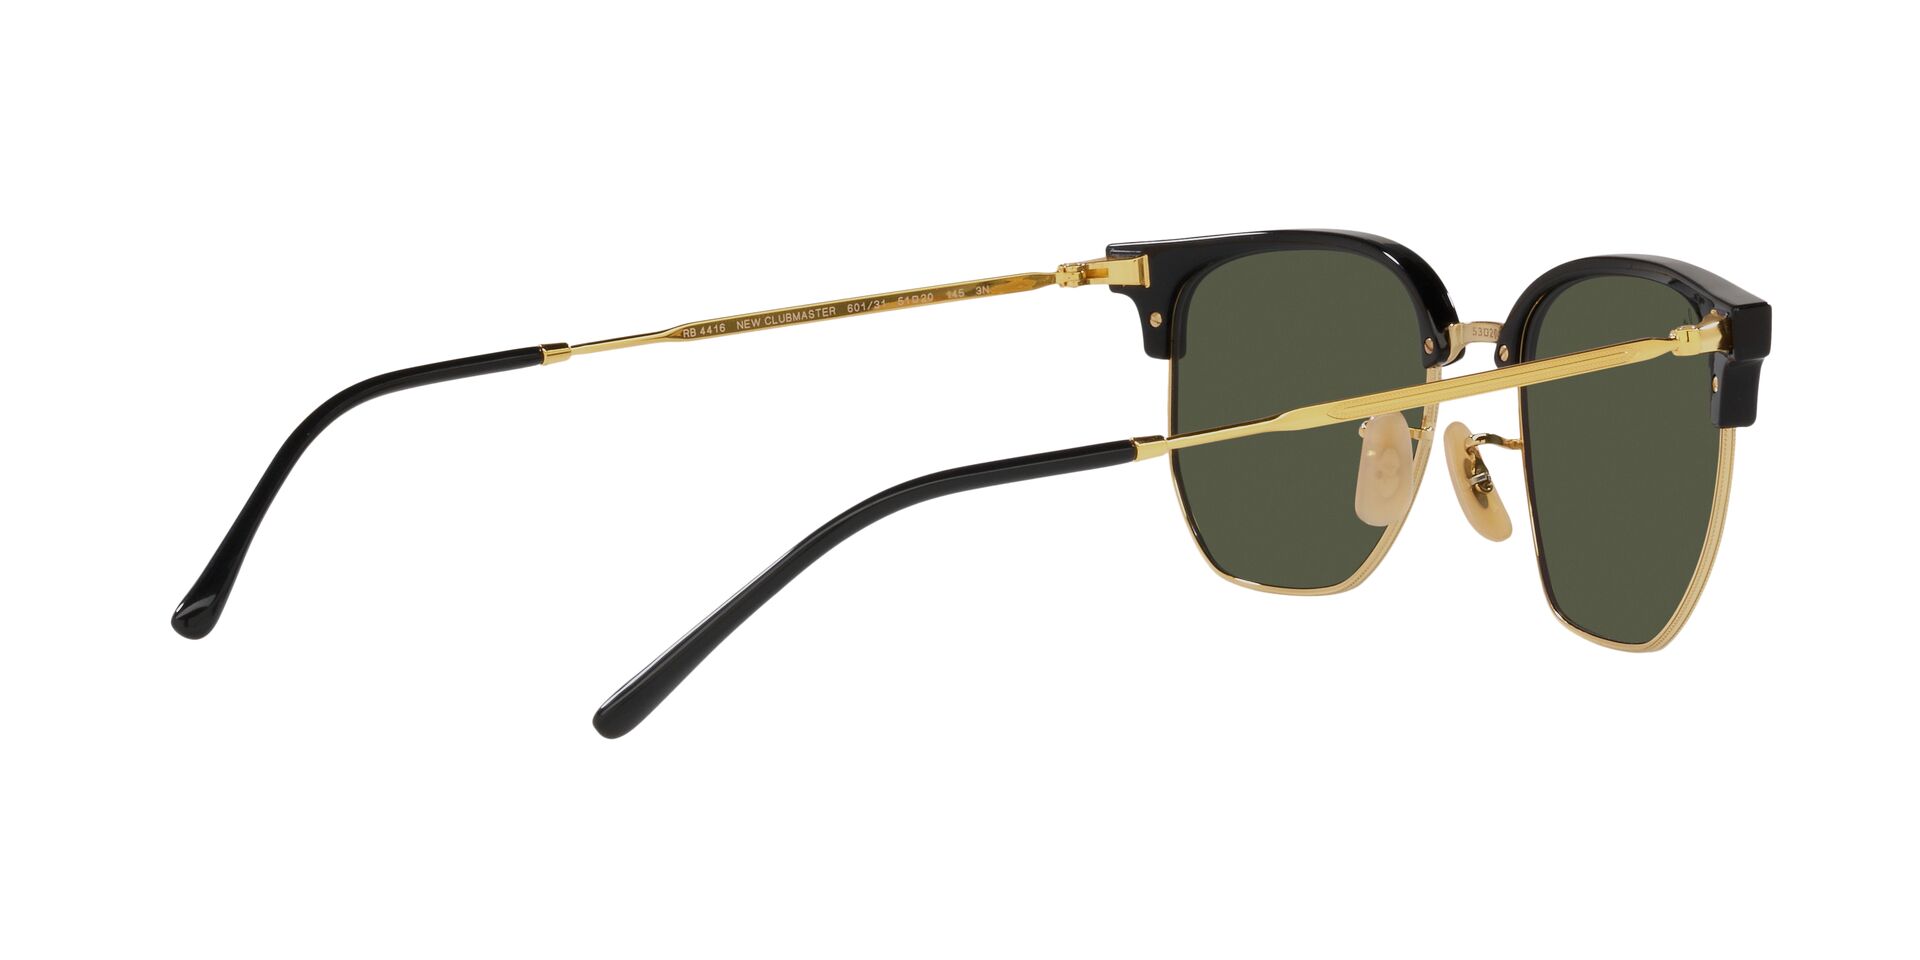 Buy Ray-Ban New Clubmaster Sunglasses Online.